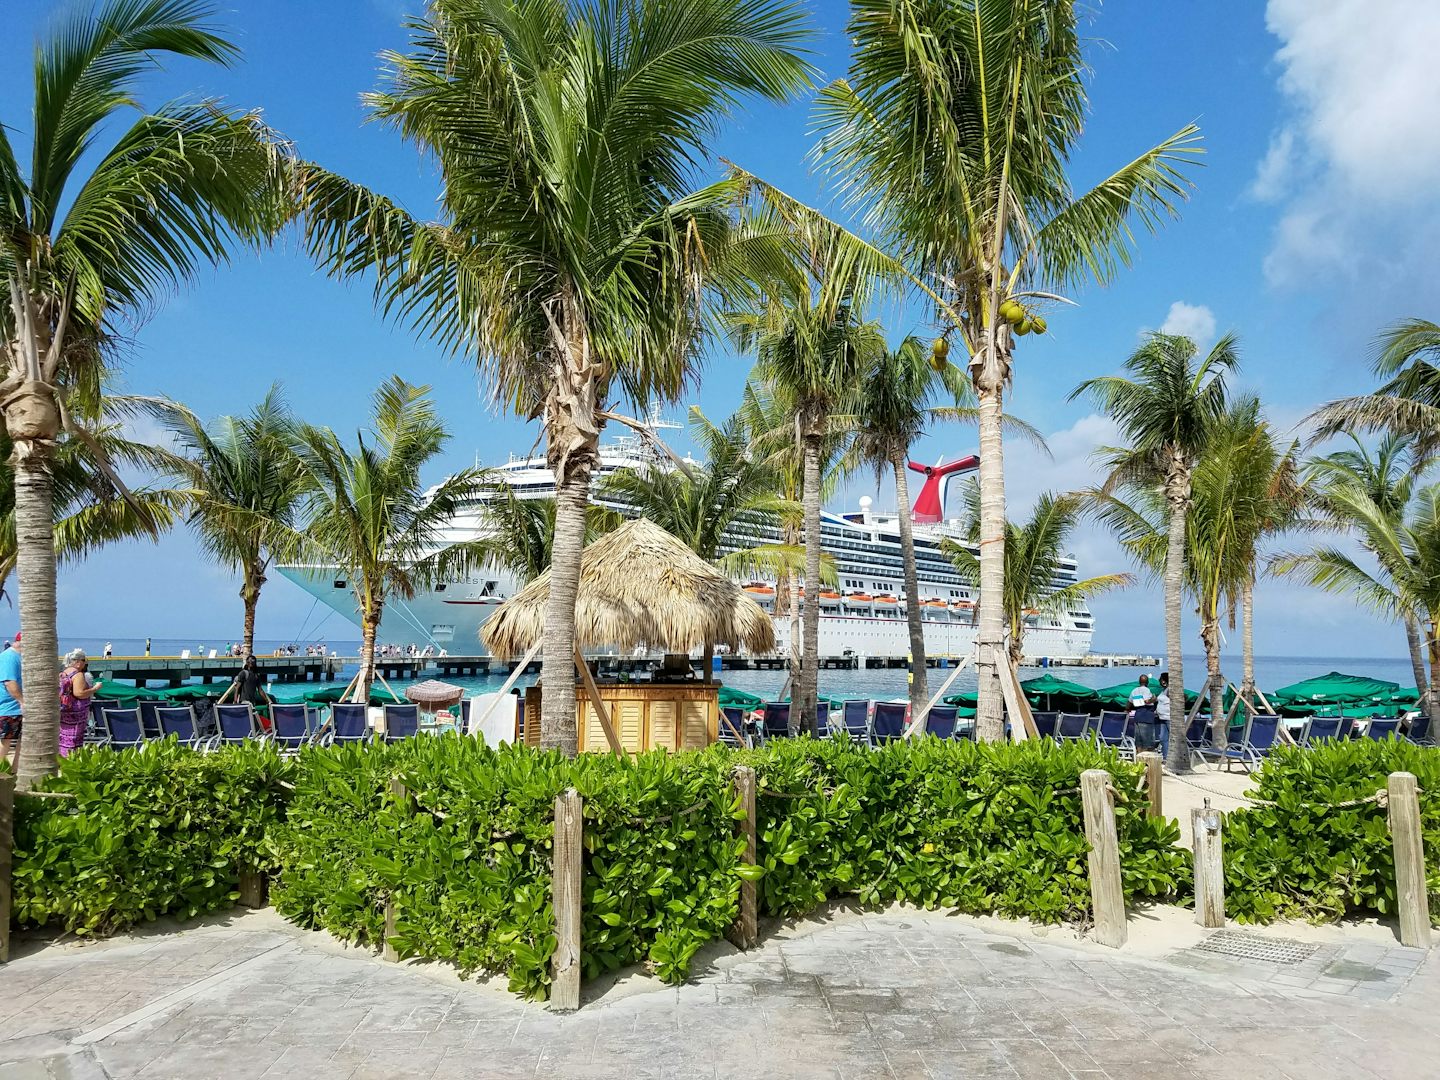 View of the ship from Grand Turk.